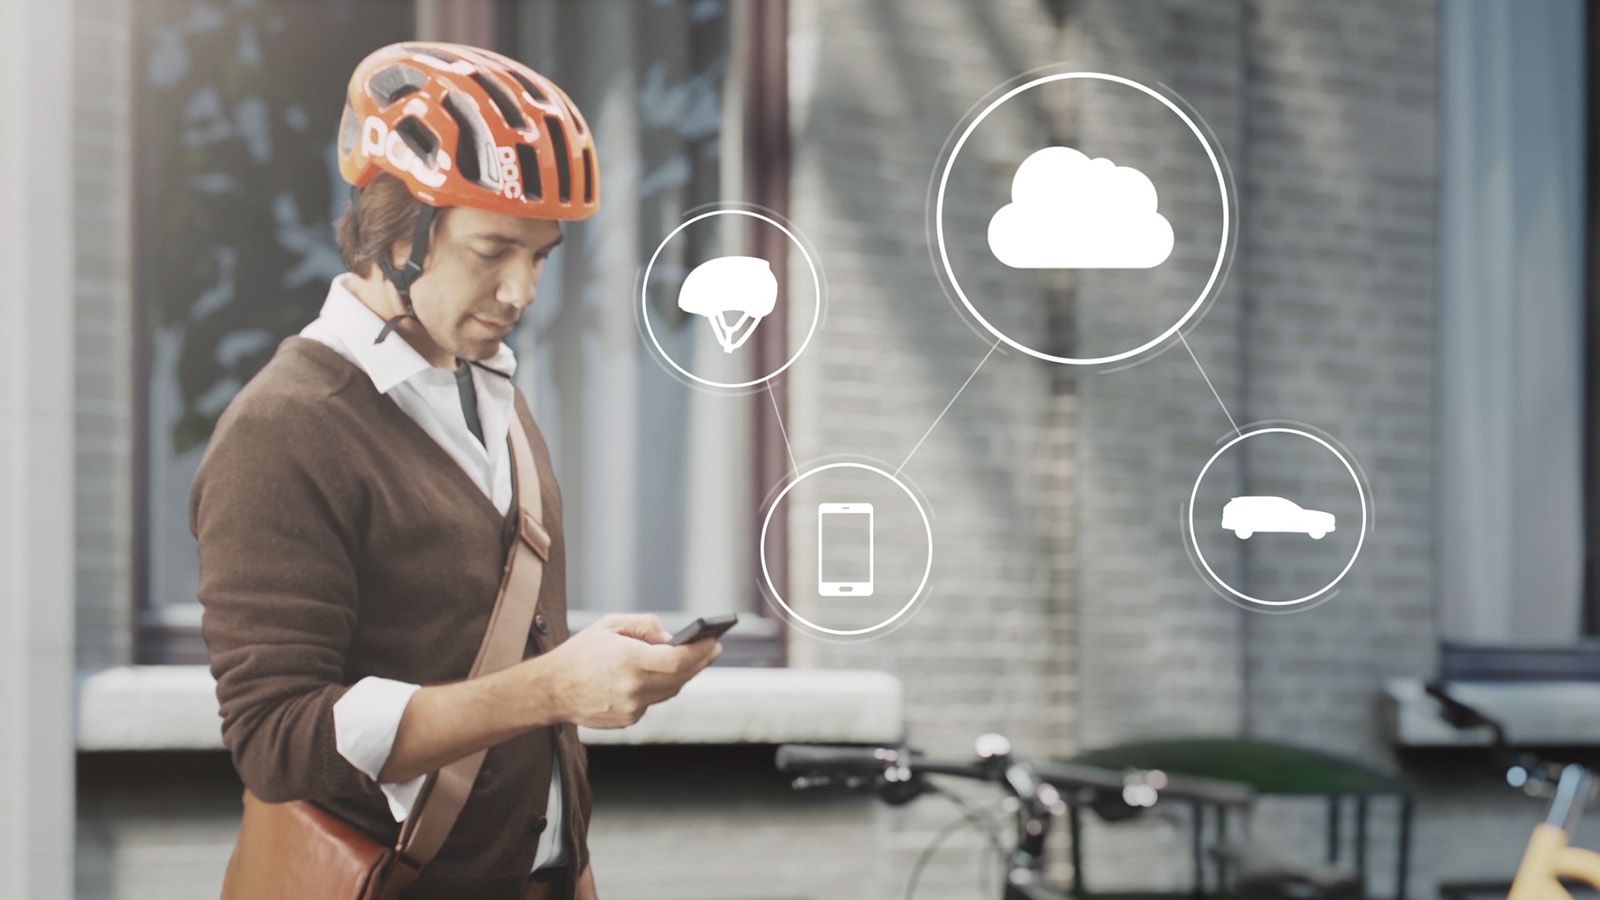 volvo wants to connect cyclists and cars together through helmet tech to prevent accidents image 1